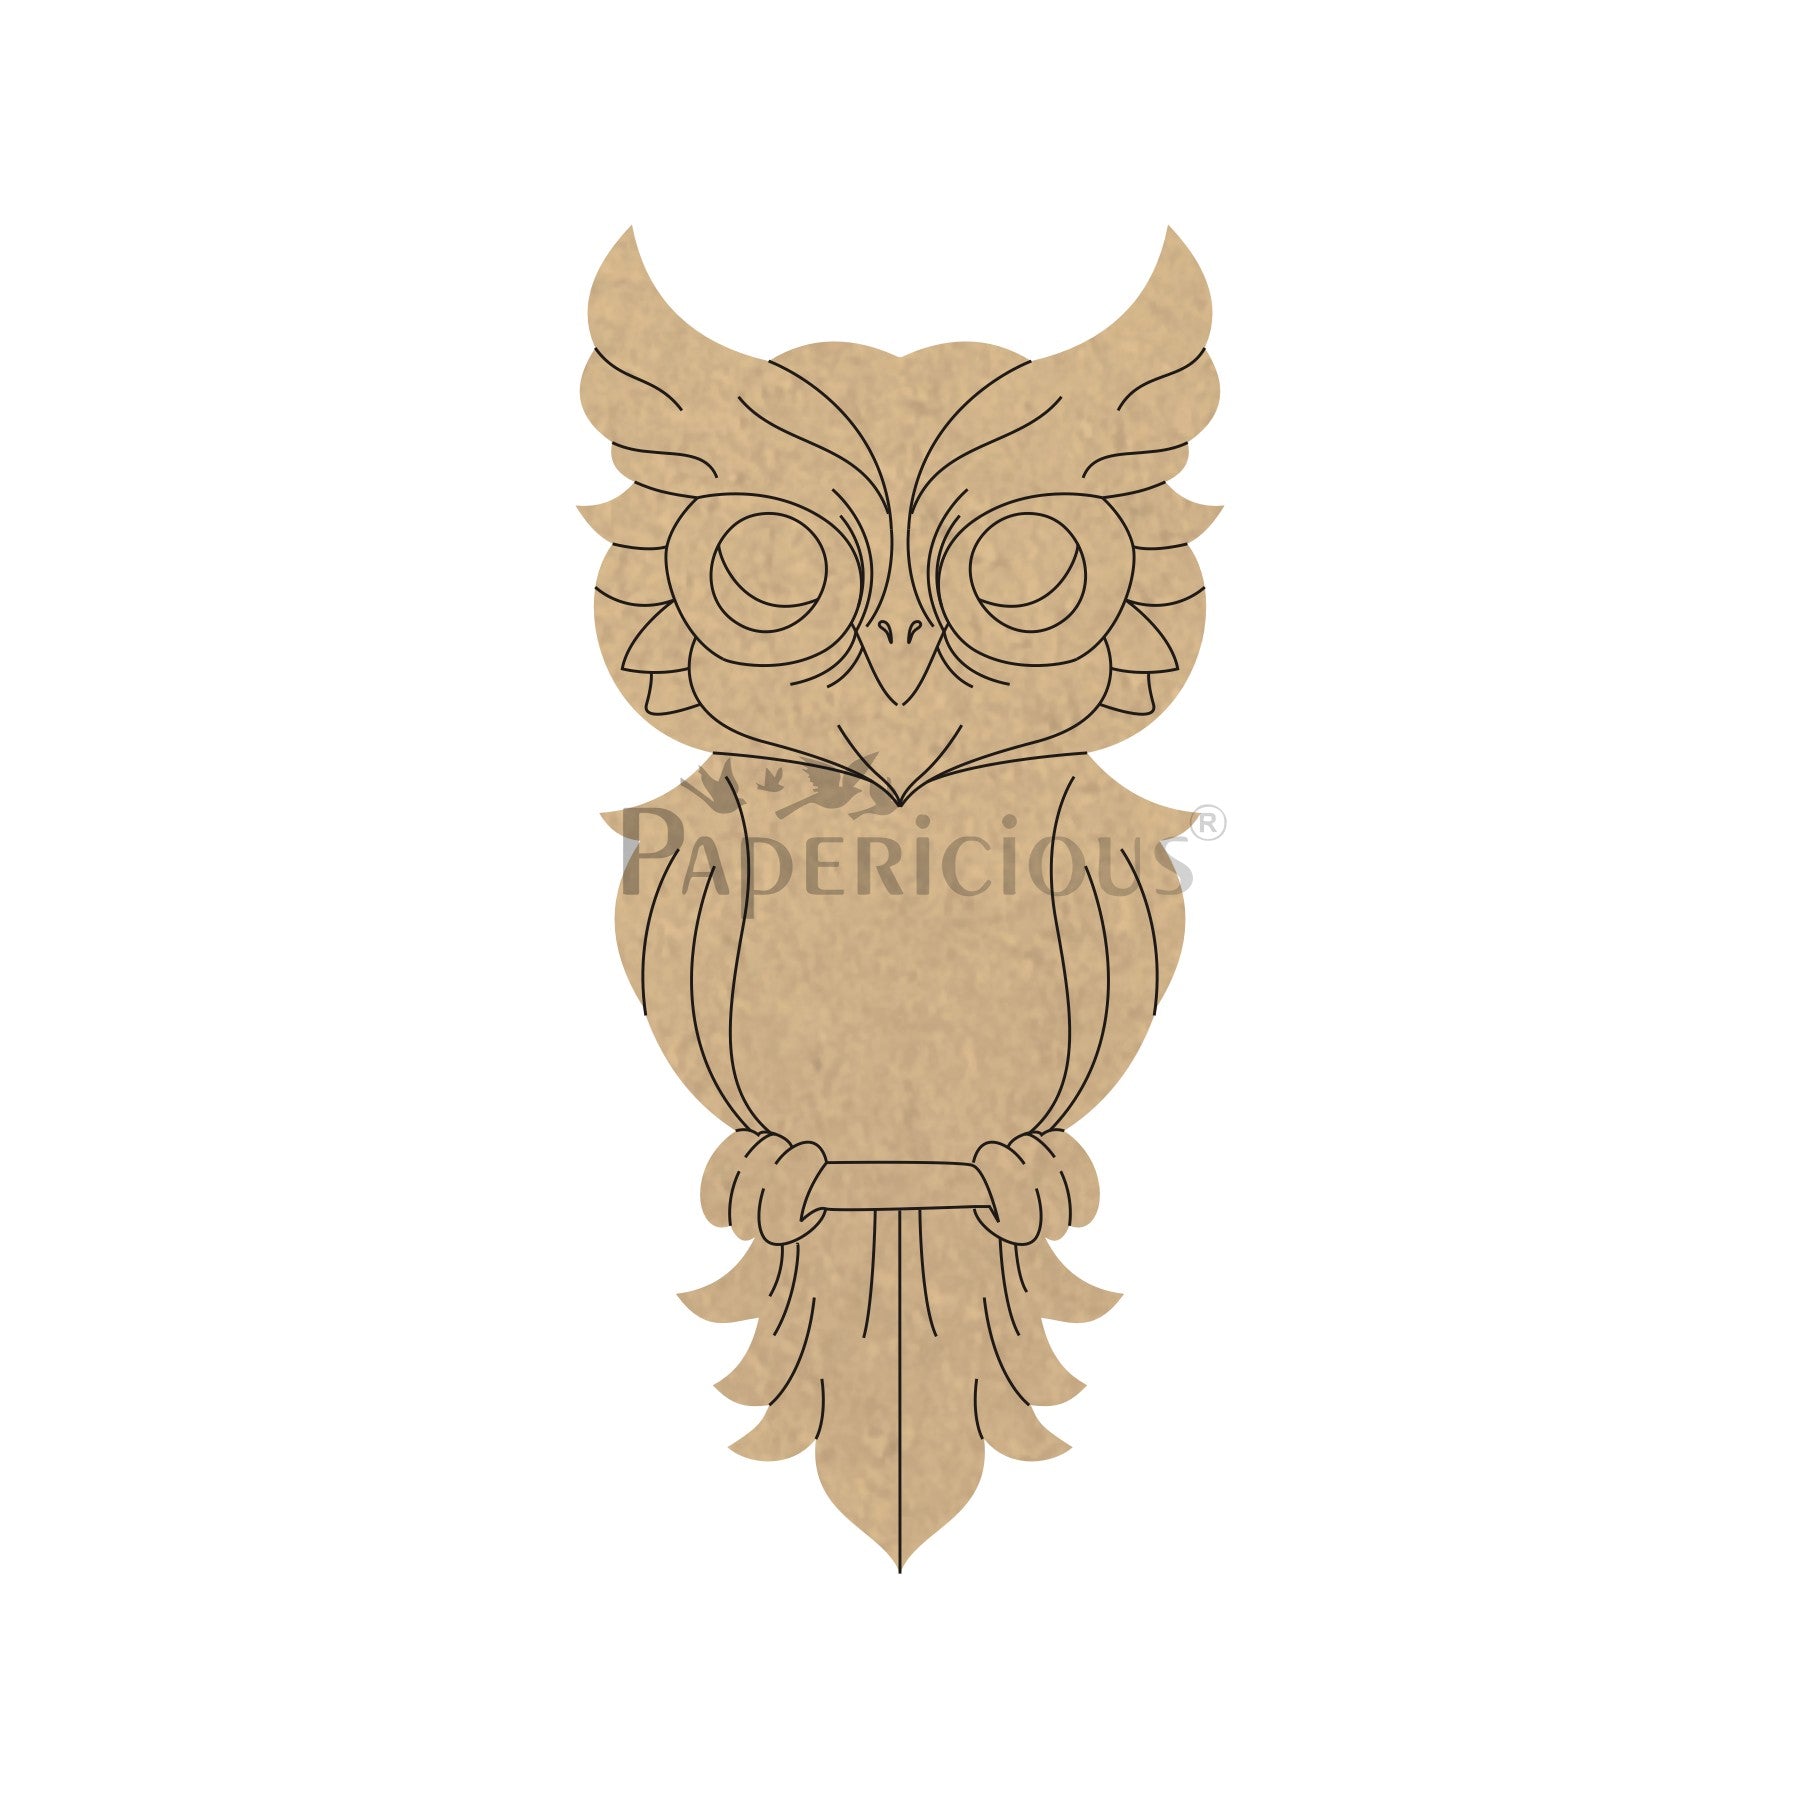 PAPERICIOUS 4mm thick Pre Marked MDF Base Owl